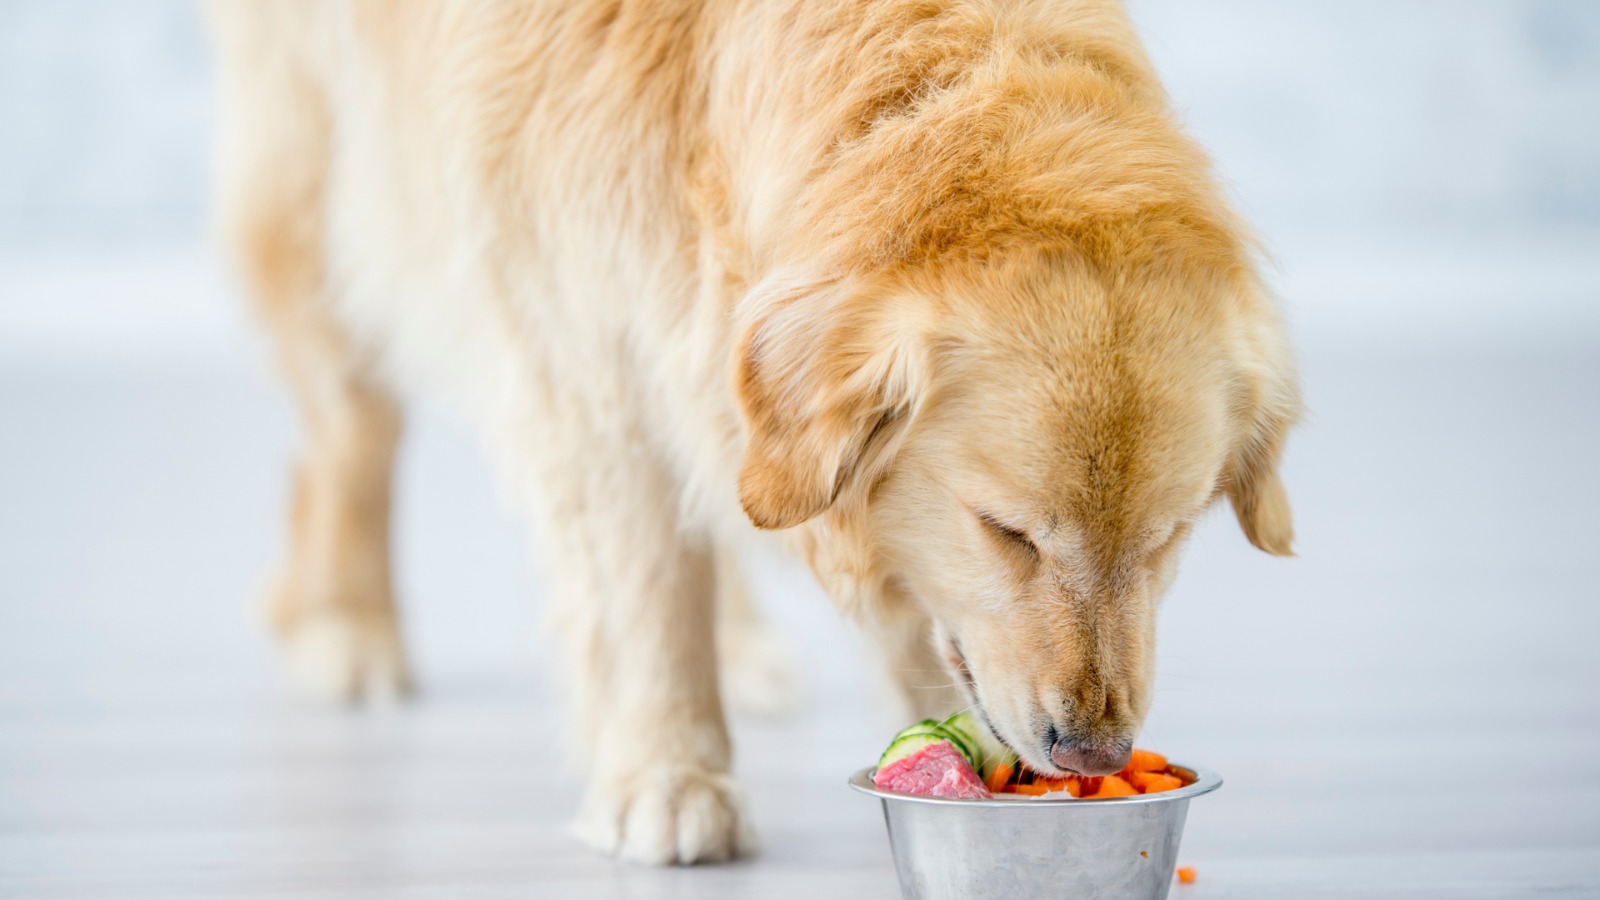 How To Increase The Iron In My Dog’s Diet